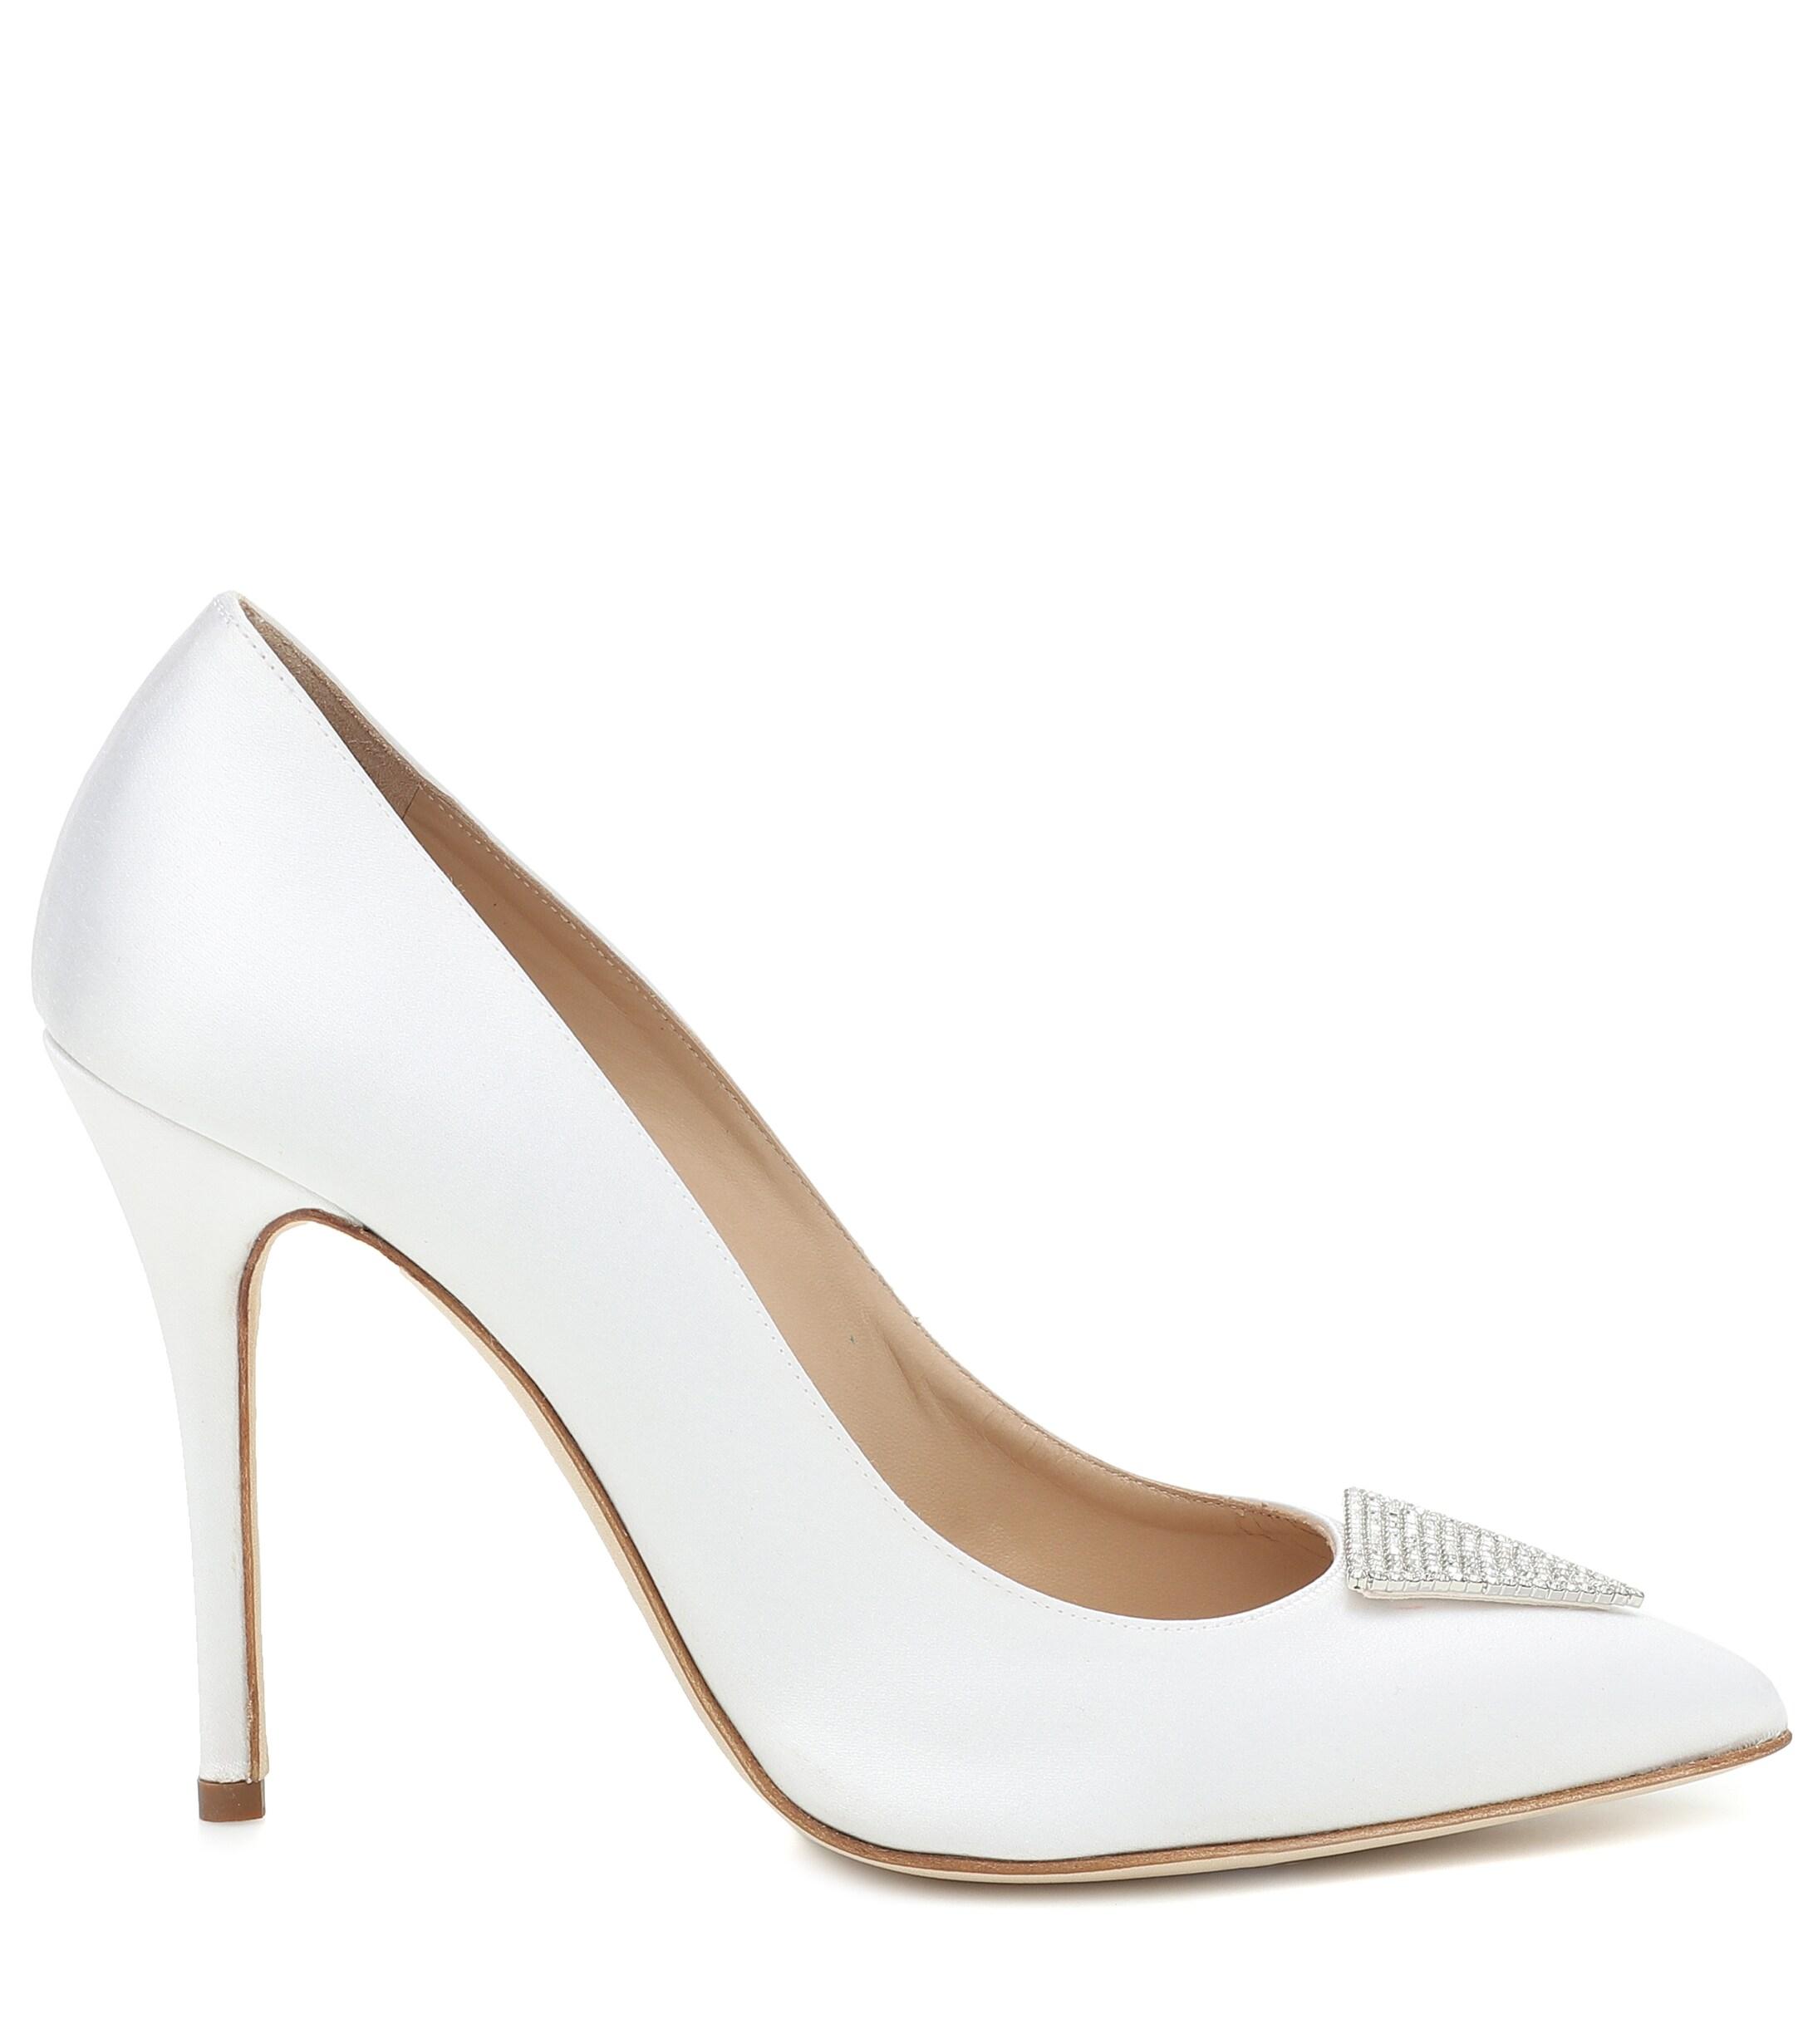 Alessandra Rich Embellished Satin Pumps in White - Lyst